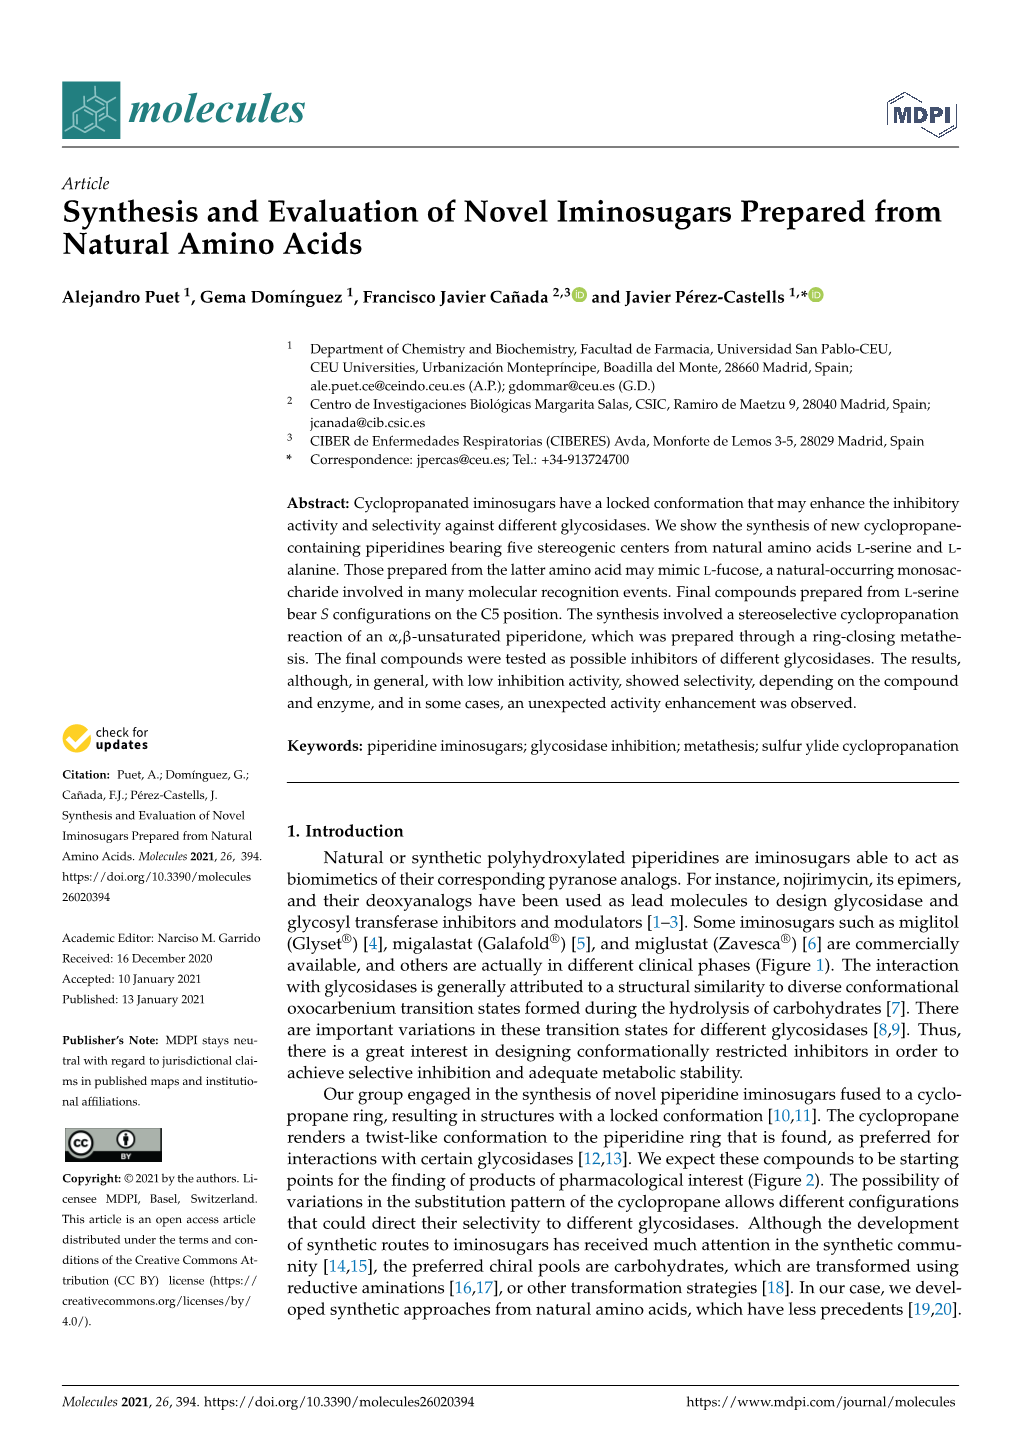 Synthesis and Evaluation of Novel Iminosugars Prepared from Natural Amino Acids